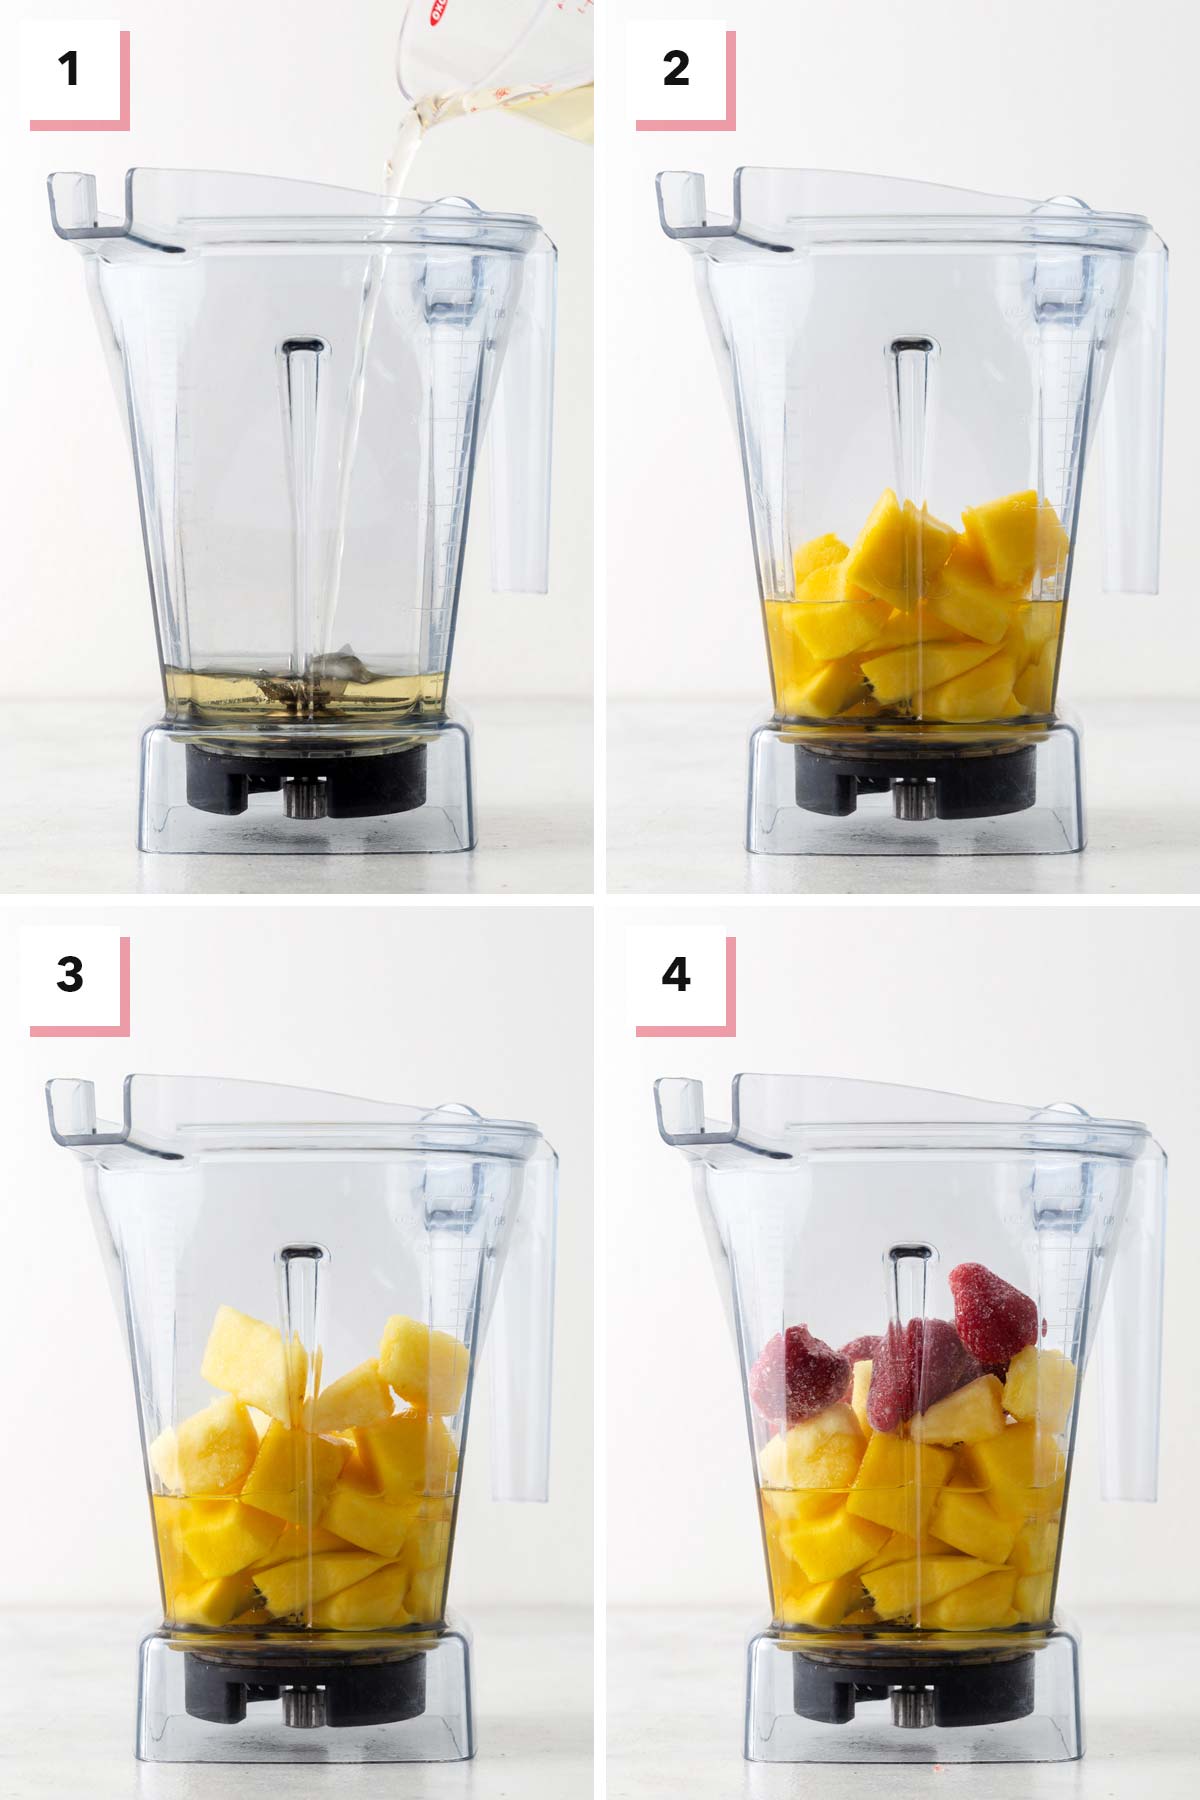 Steps for making a fruit smoothie.